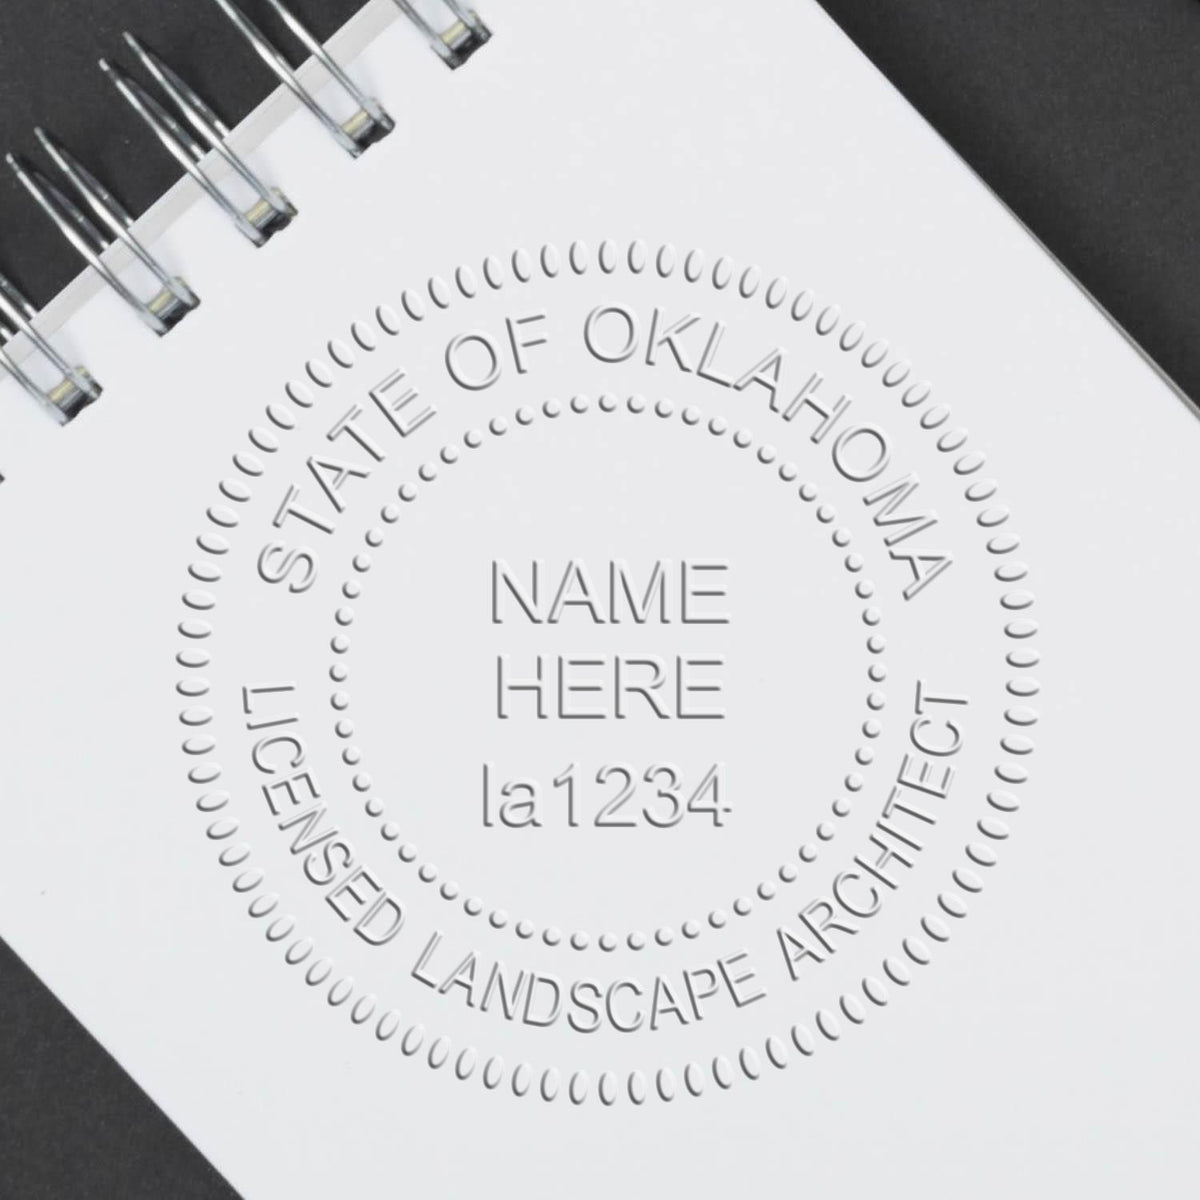 A stamped imprint of the Gift Oklahoma Landscape Architect Seal in this stylish lifestyle photo, setting the tone for a unique and personalized product.